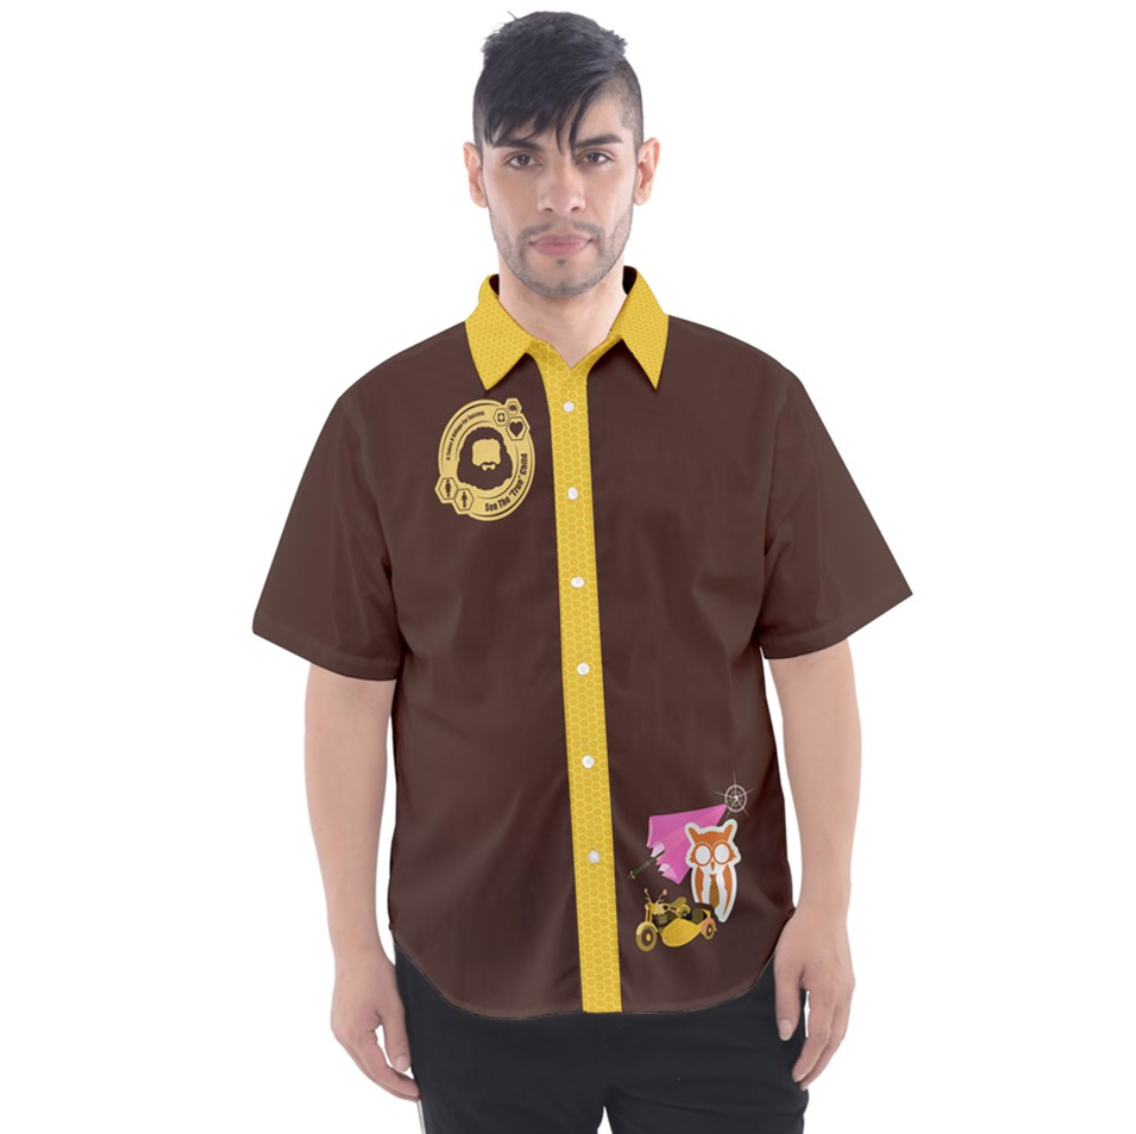 See The "TRUE" Child Button Up Short Sleeve Shirt (Simple Brown) - Inspired by literary character, Hagrid